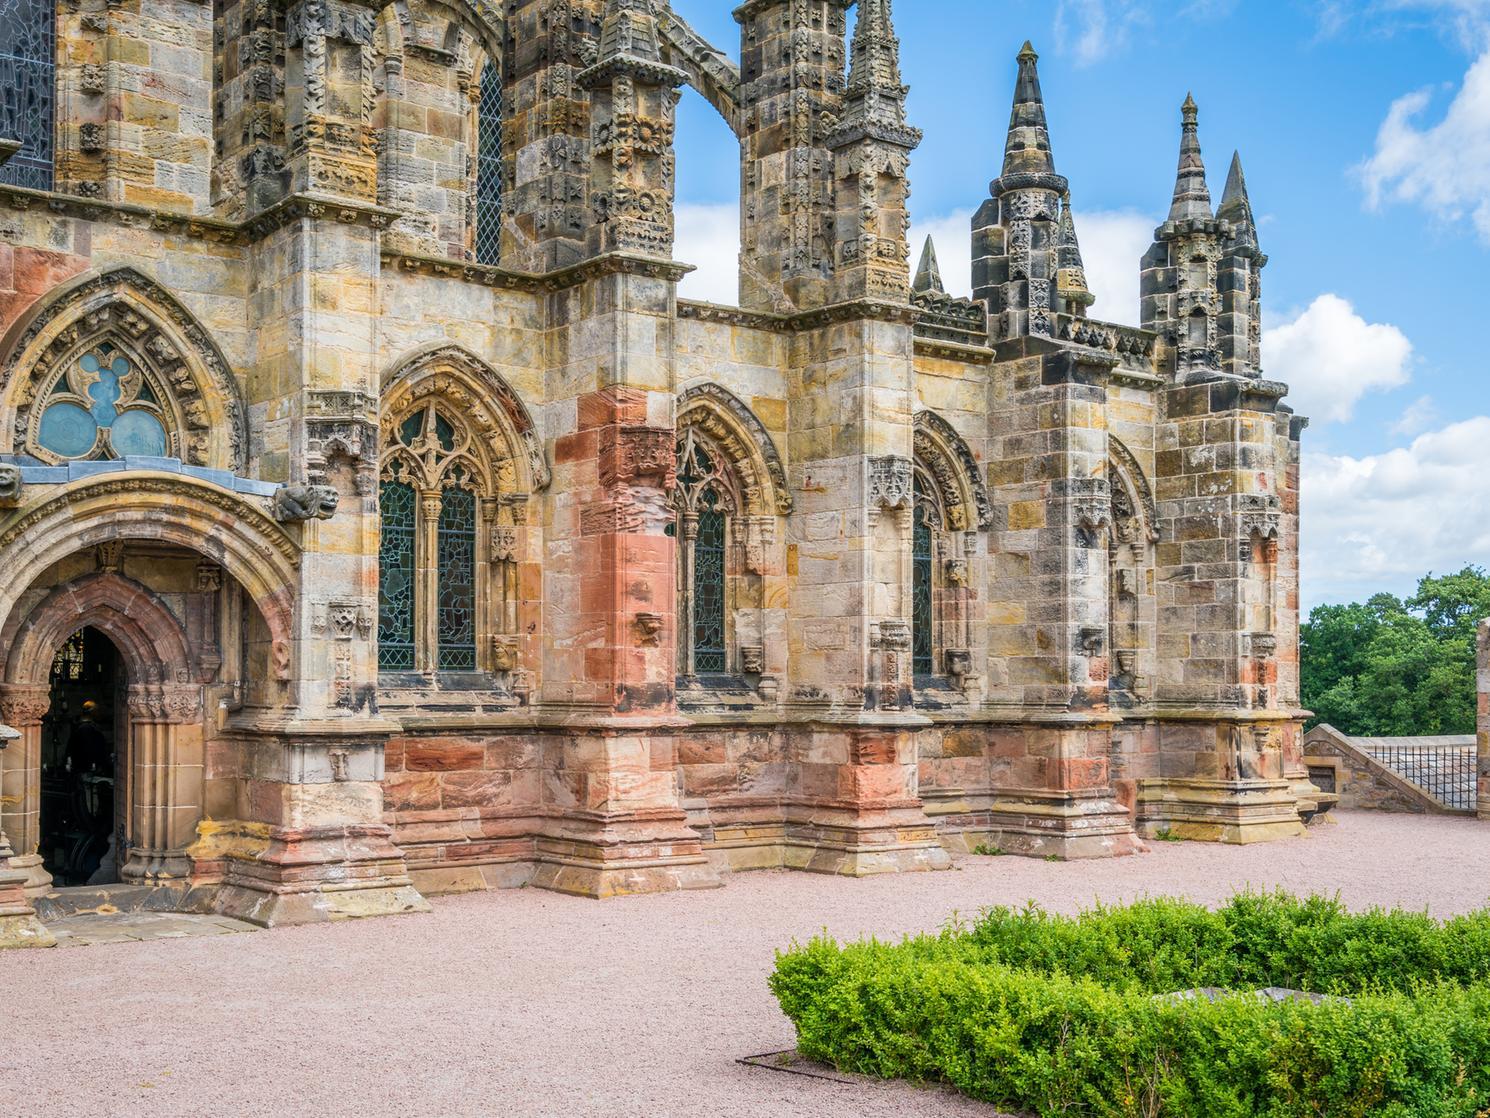 Rosslyn Chapel was founded in 1446 as a place of worship, and was featured in The Da Vinci Codes dramatic final scenes.